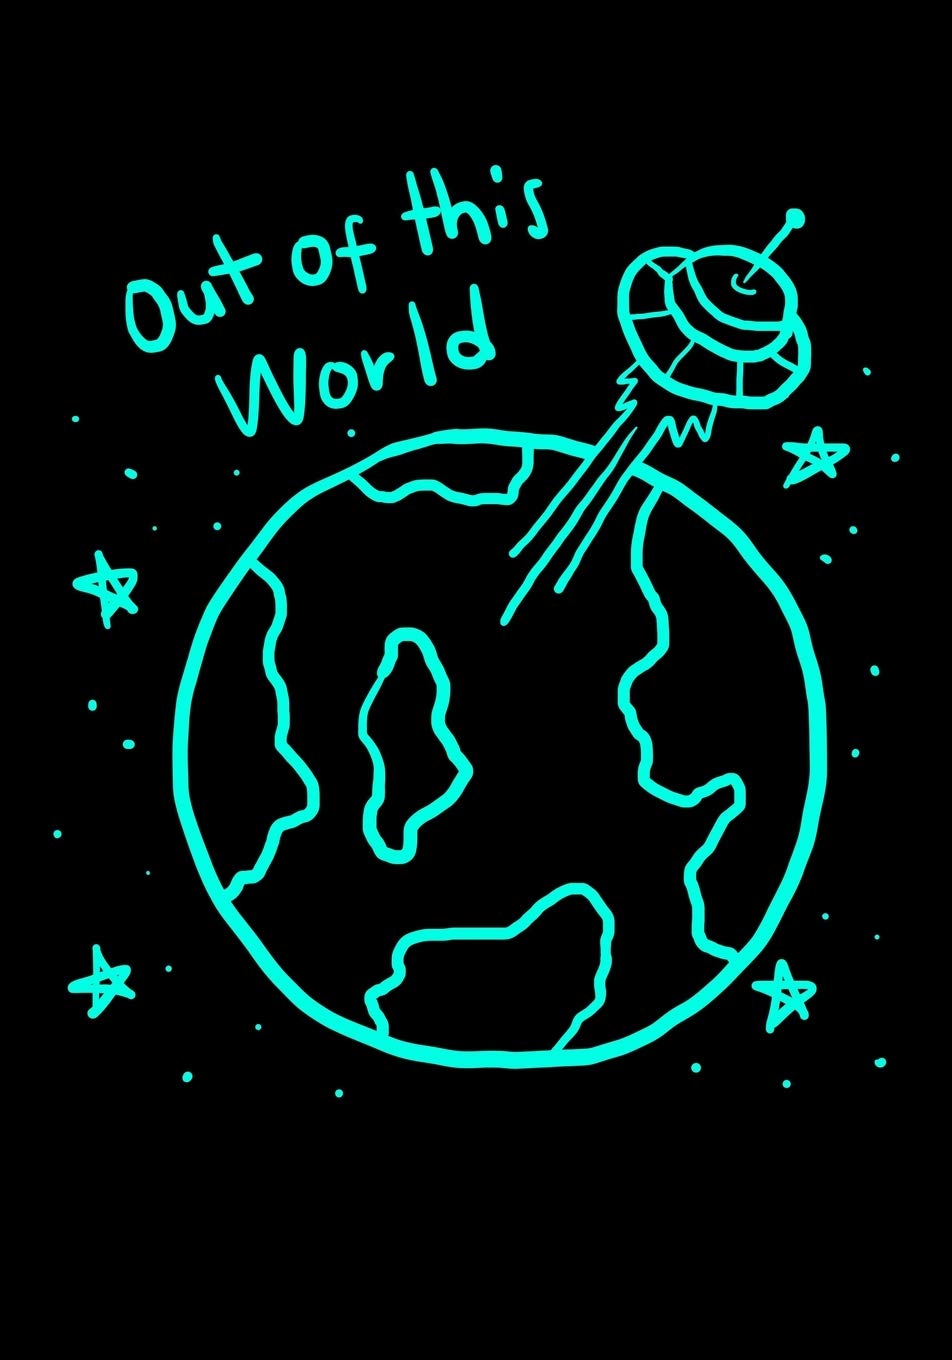 Idiom: Out of this world.